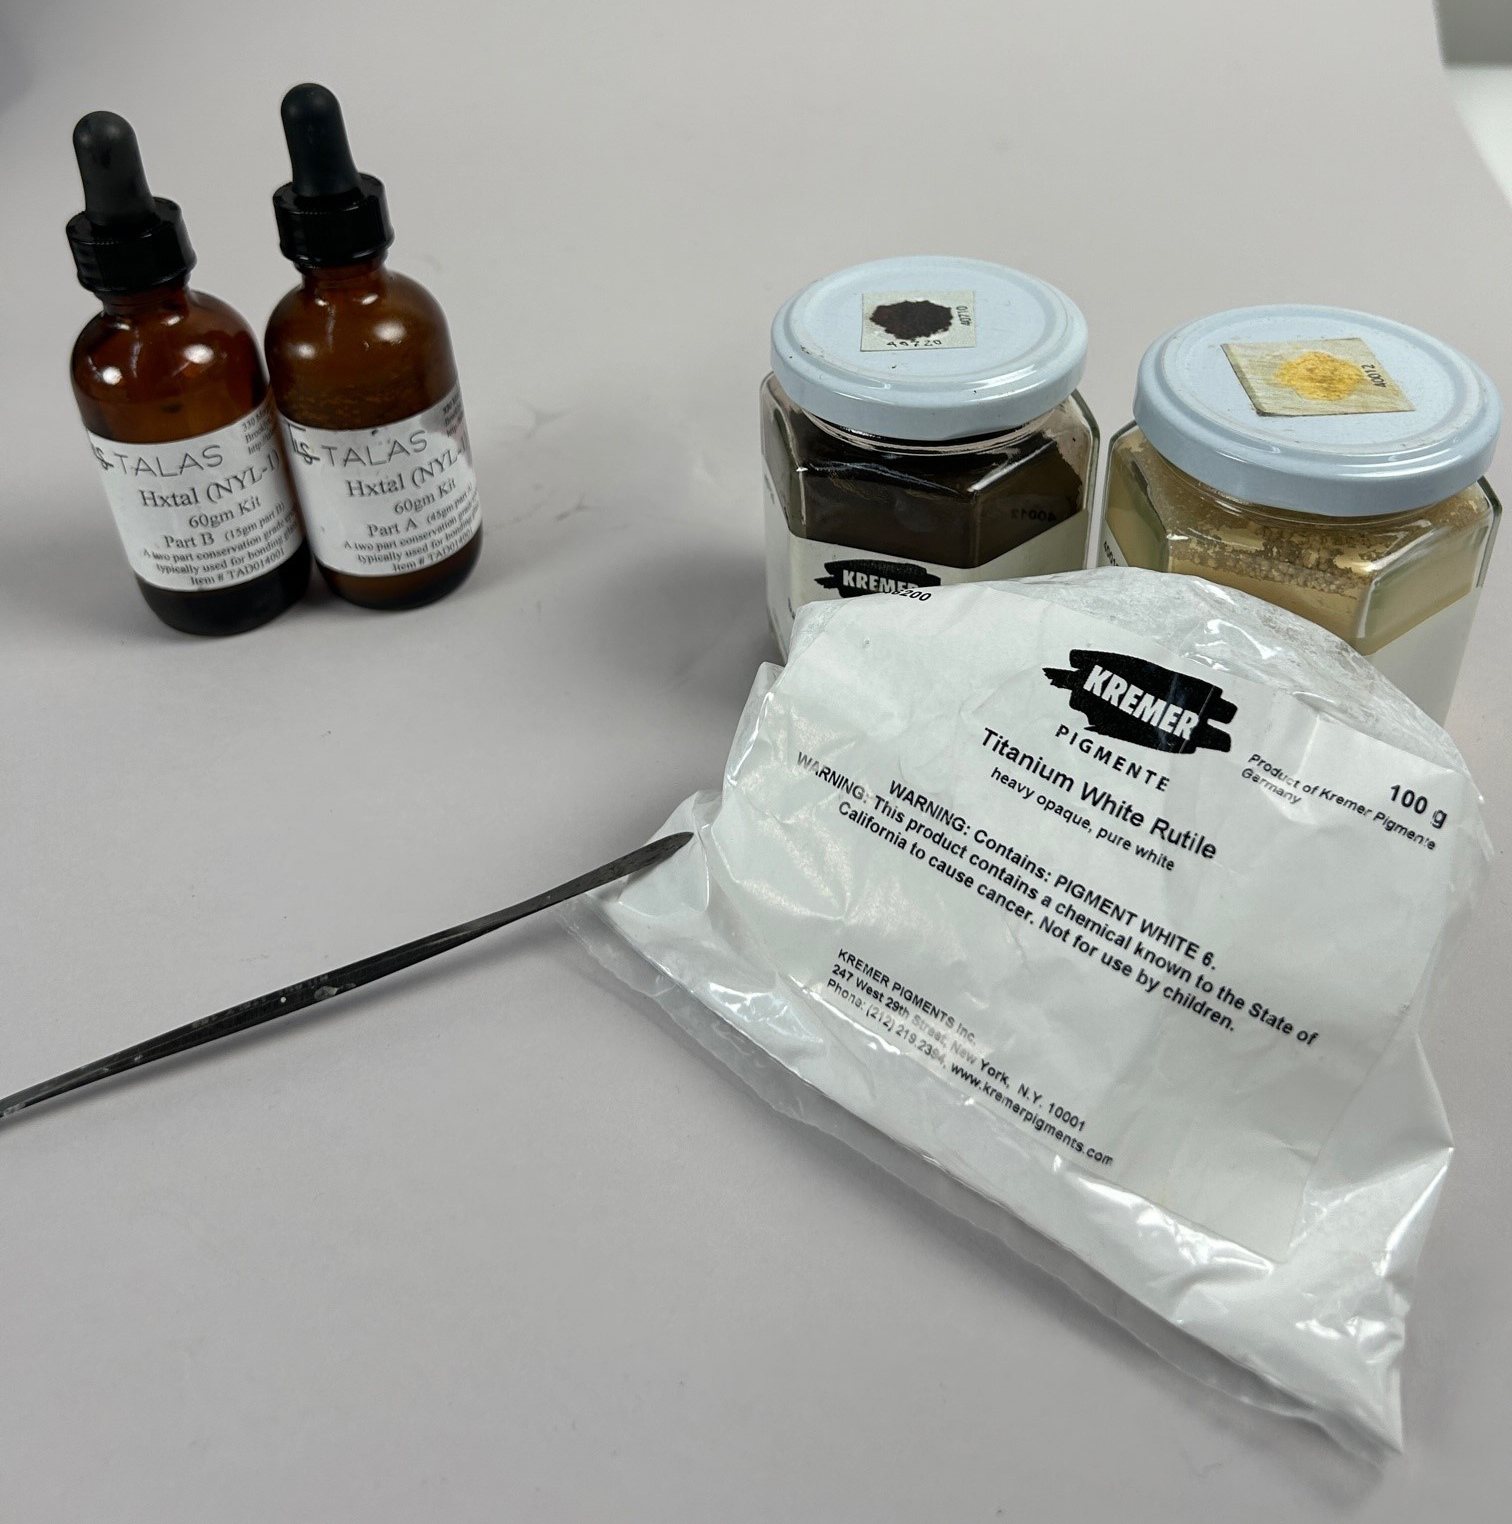 On a blank surface are two small bottles of chemicals, two jars of pigment (both black and gold), a scalpel, and a plastic bag containing a white substance.